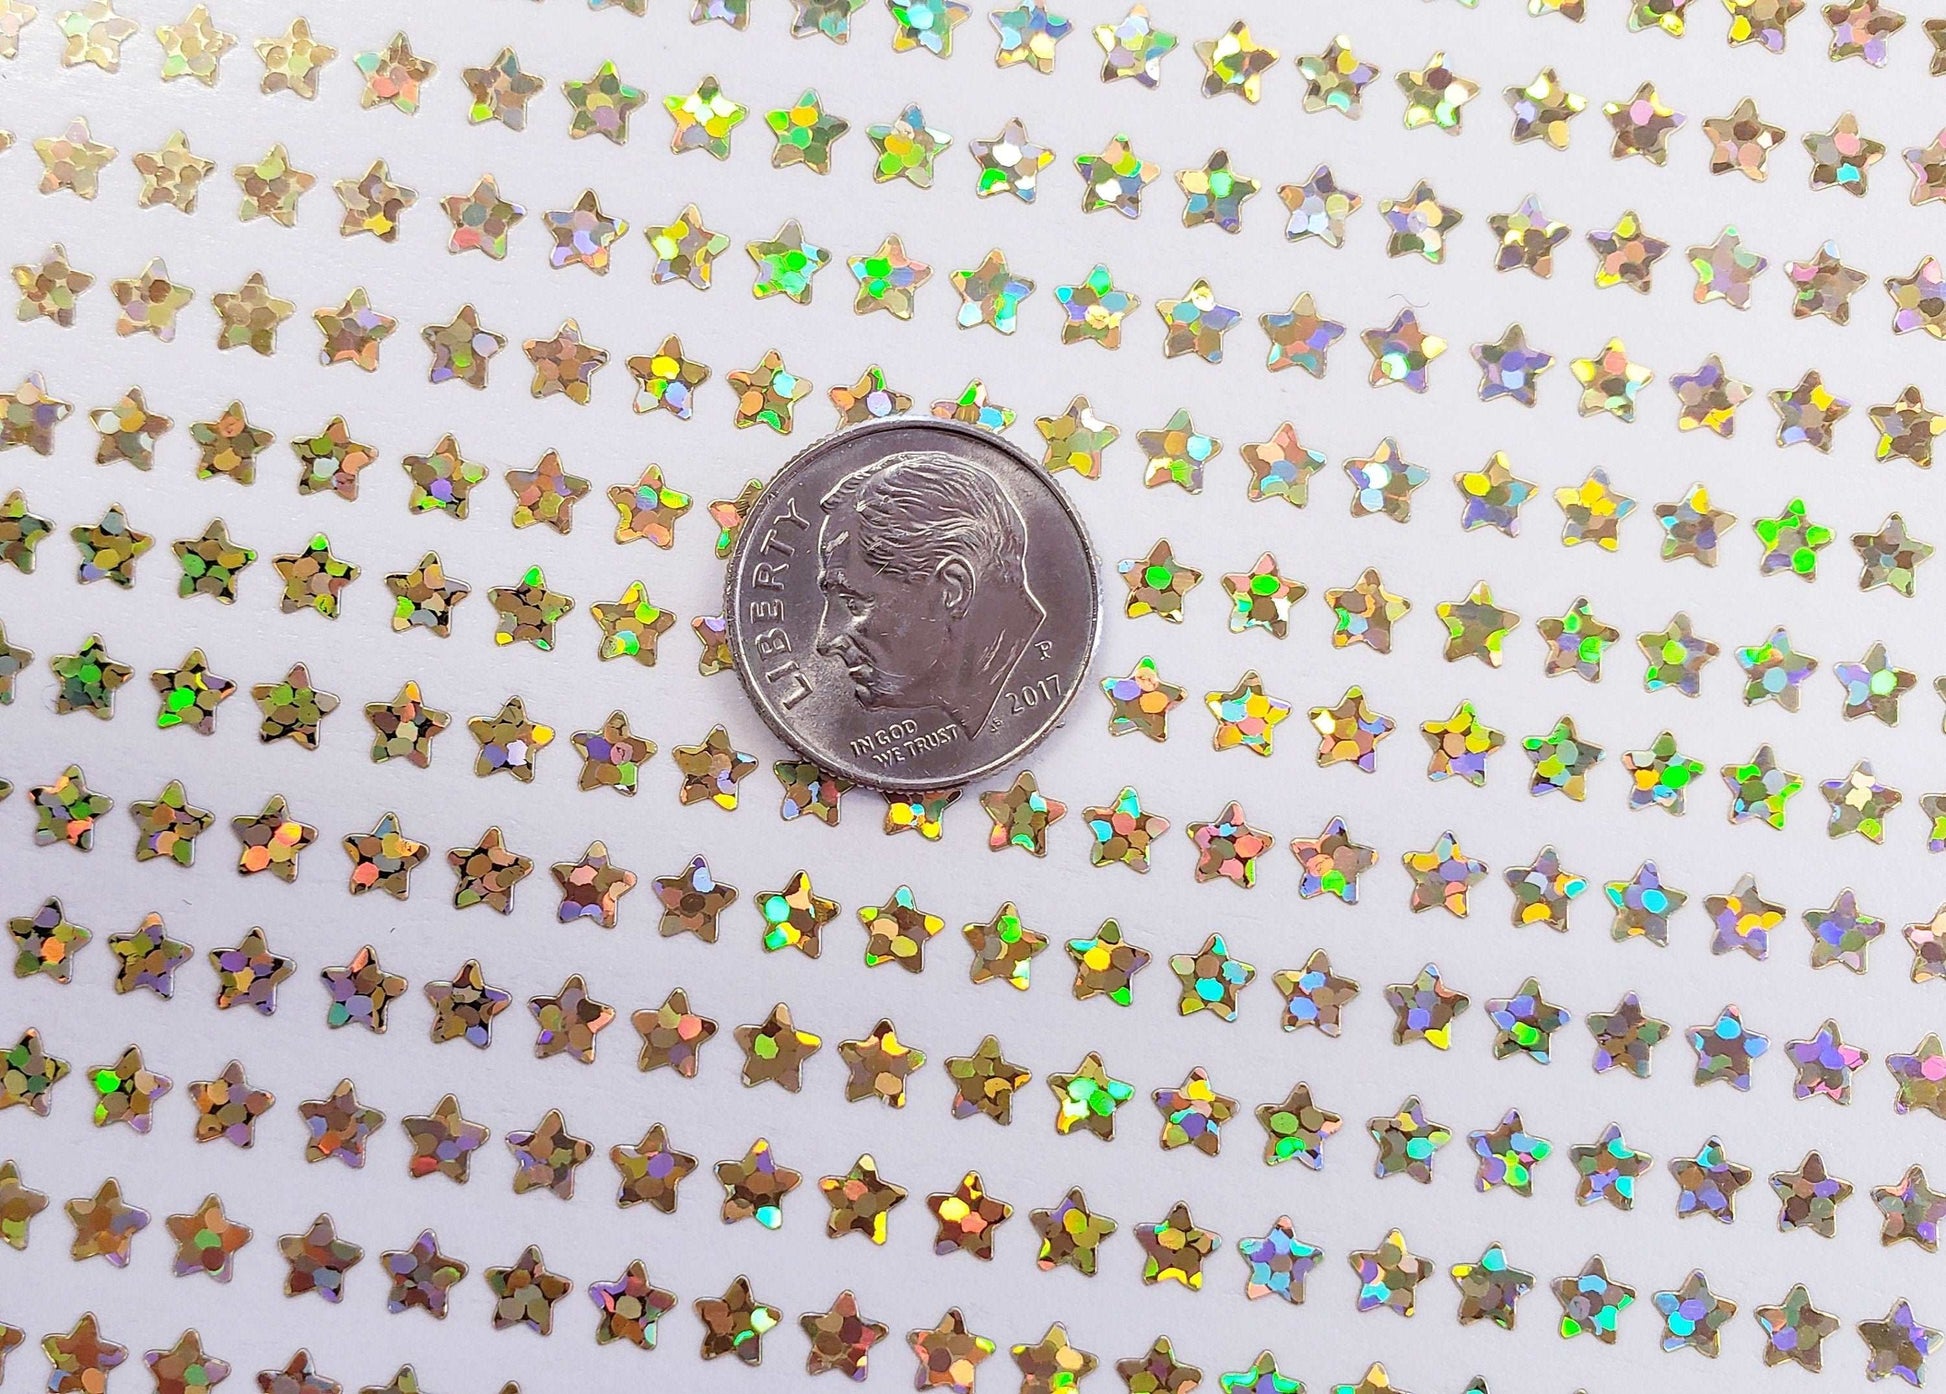 Extra Small Gold Star Stickers, set of 600 micro sized golden star vinyl stickers for journals, notebooks, nail art and craft projects